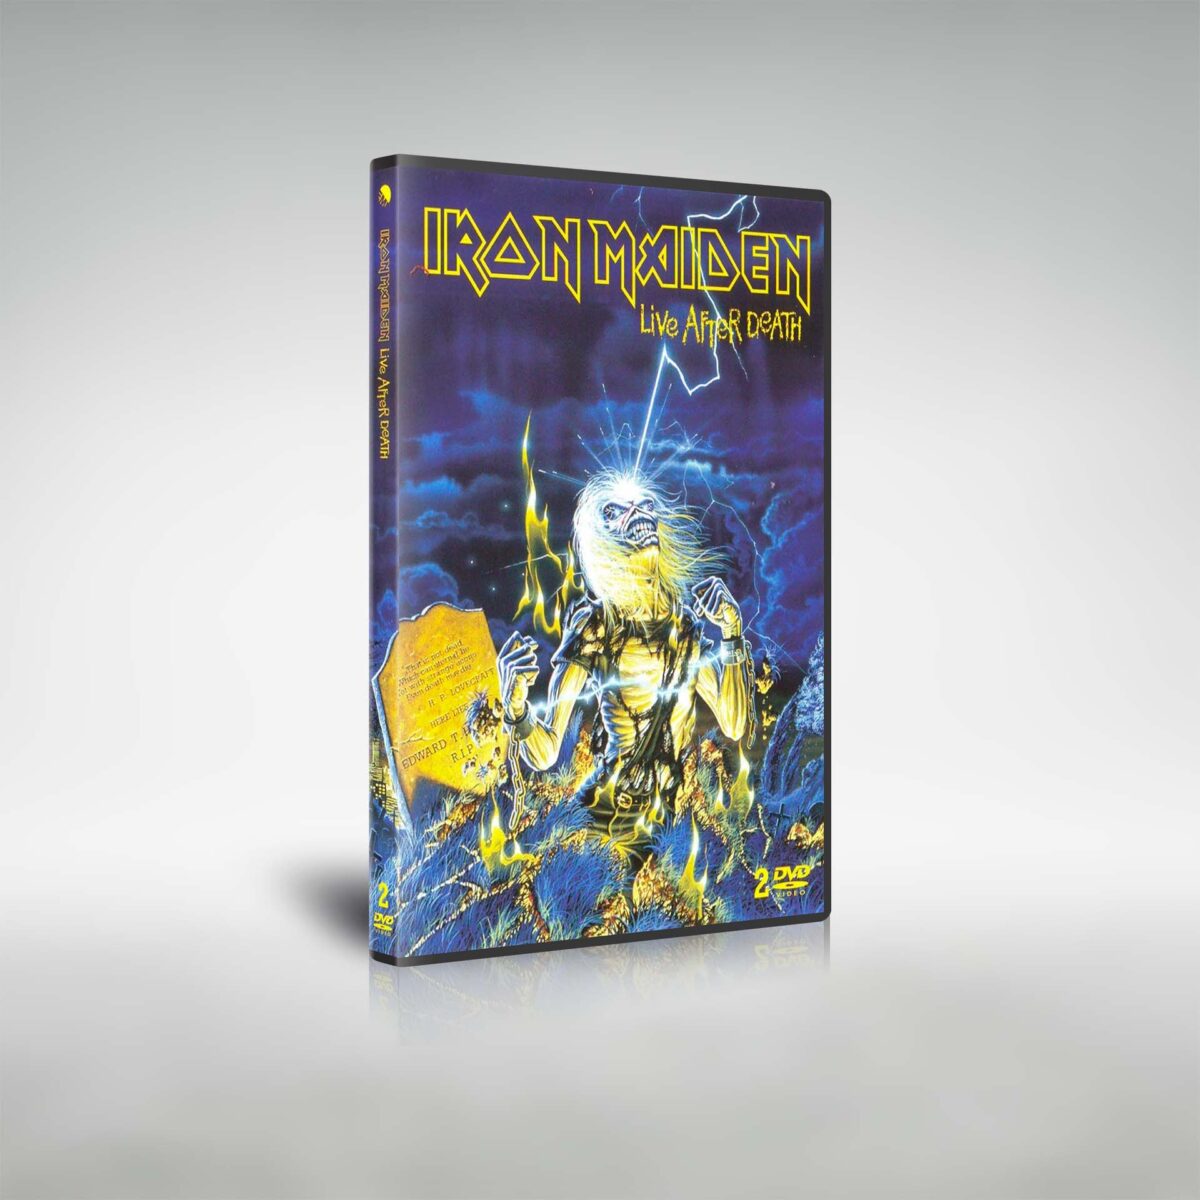 Iron Maiden - Live After Death 2DVDs